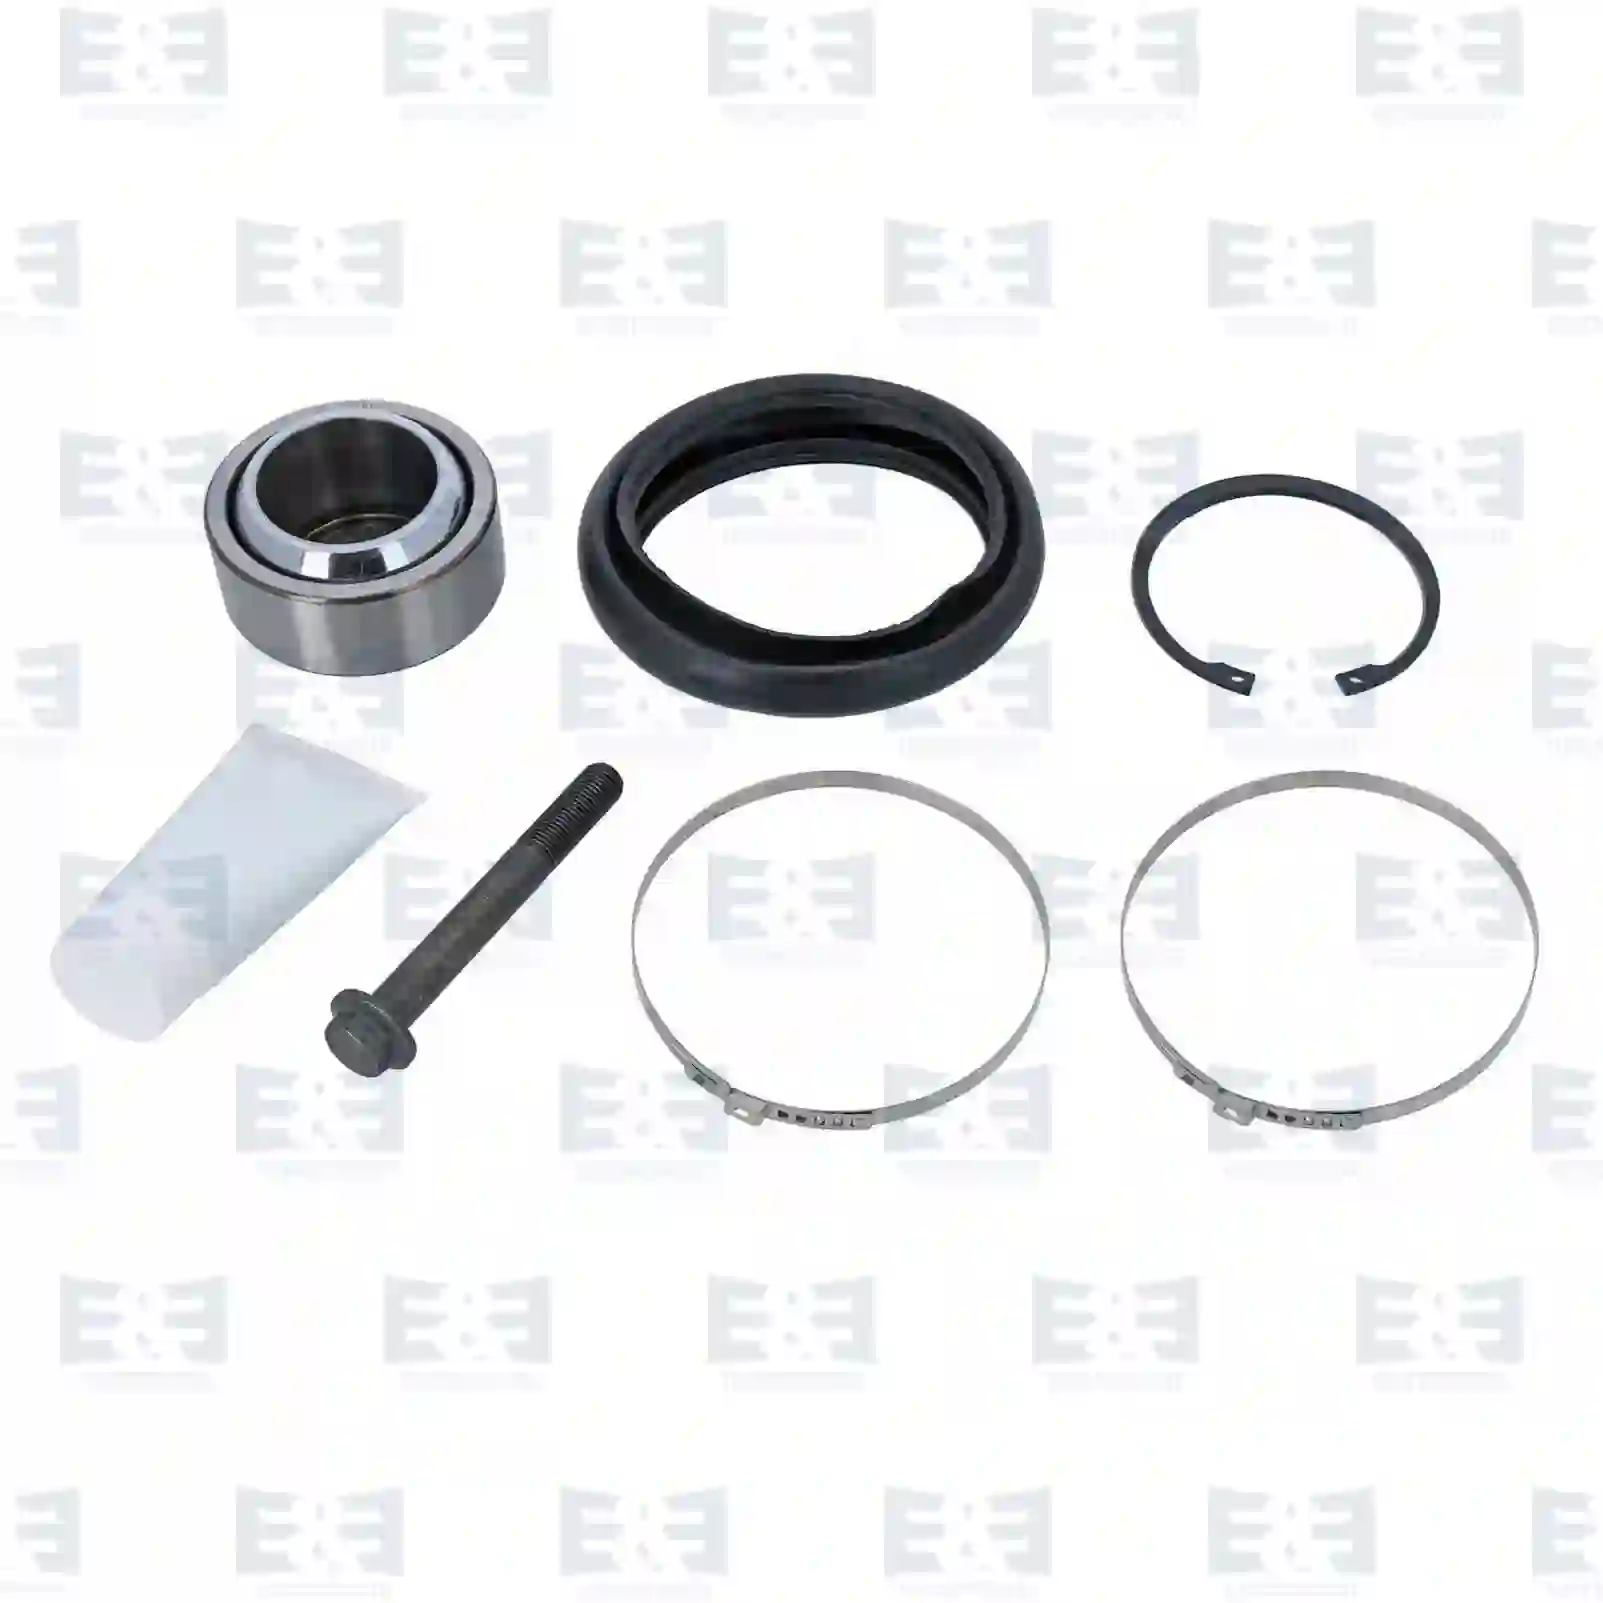 Repair kit, v-stay, without mounting plate, 2E2281160, 20864583 ||  2E2281160 E&E Truck Spare Parts | Truck Spare Parts, Auotomotive Spare Parts Repair kit, v-stay, without mounting plate, 2E2281160, 20864583 ||  2E2281160 E&E Truck Spare Parts | Truck Spare Parts, Auotomotive Spare Parts